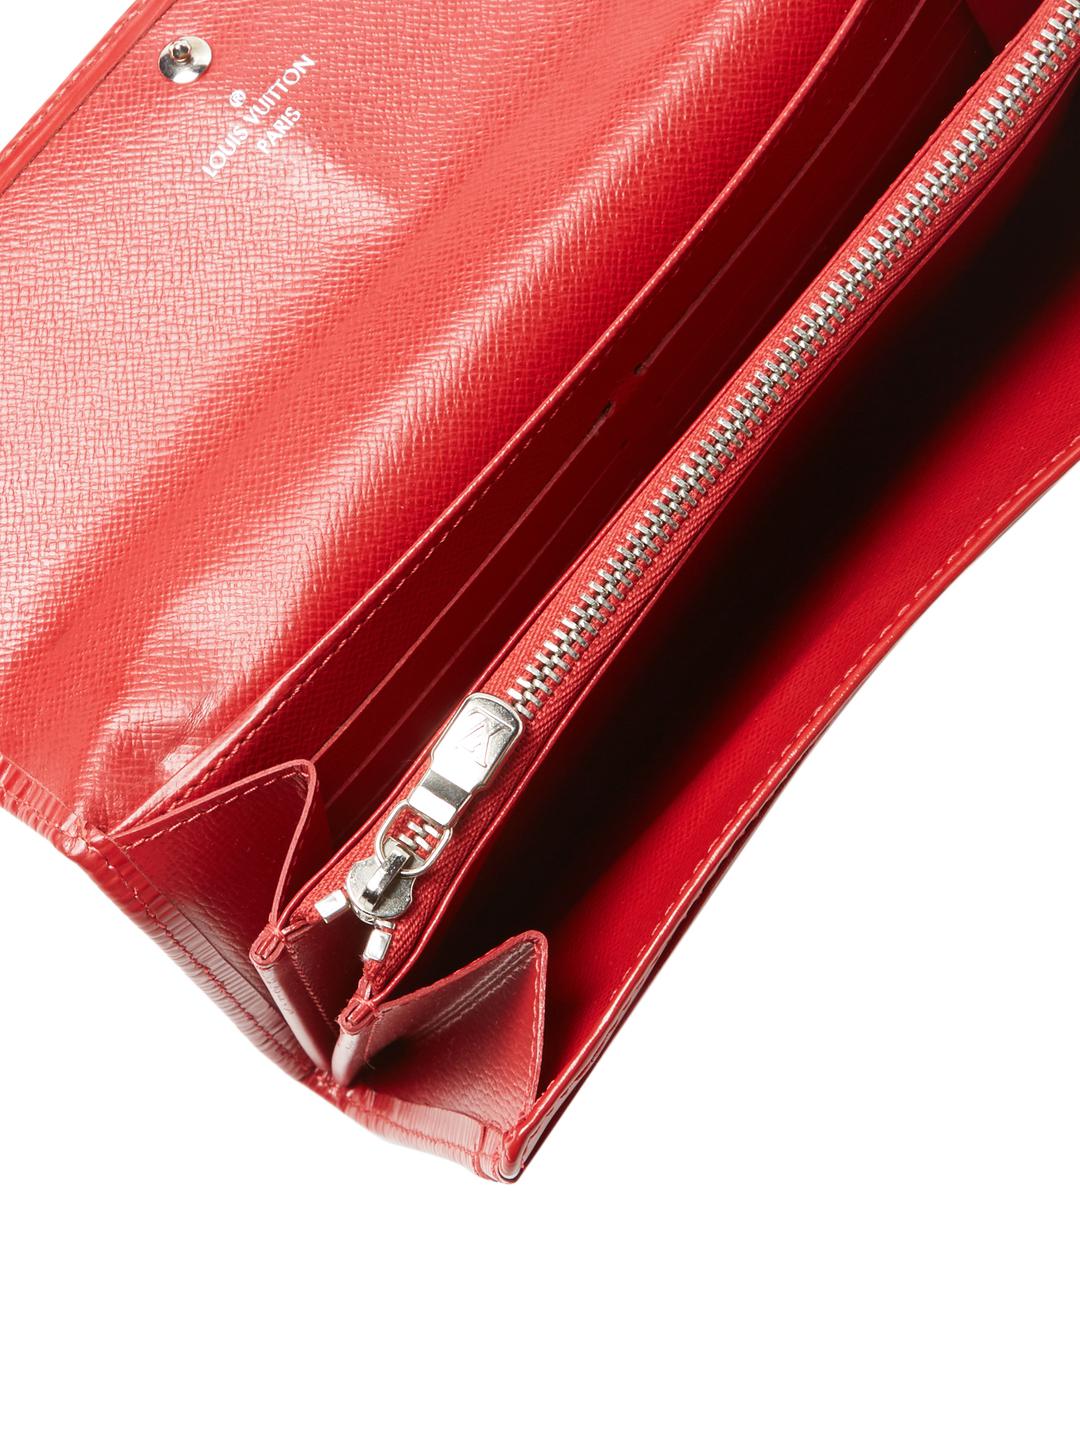 Louis Vuitton Leather Vintage Epi Sarah Wallet in Red - Lyst